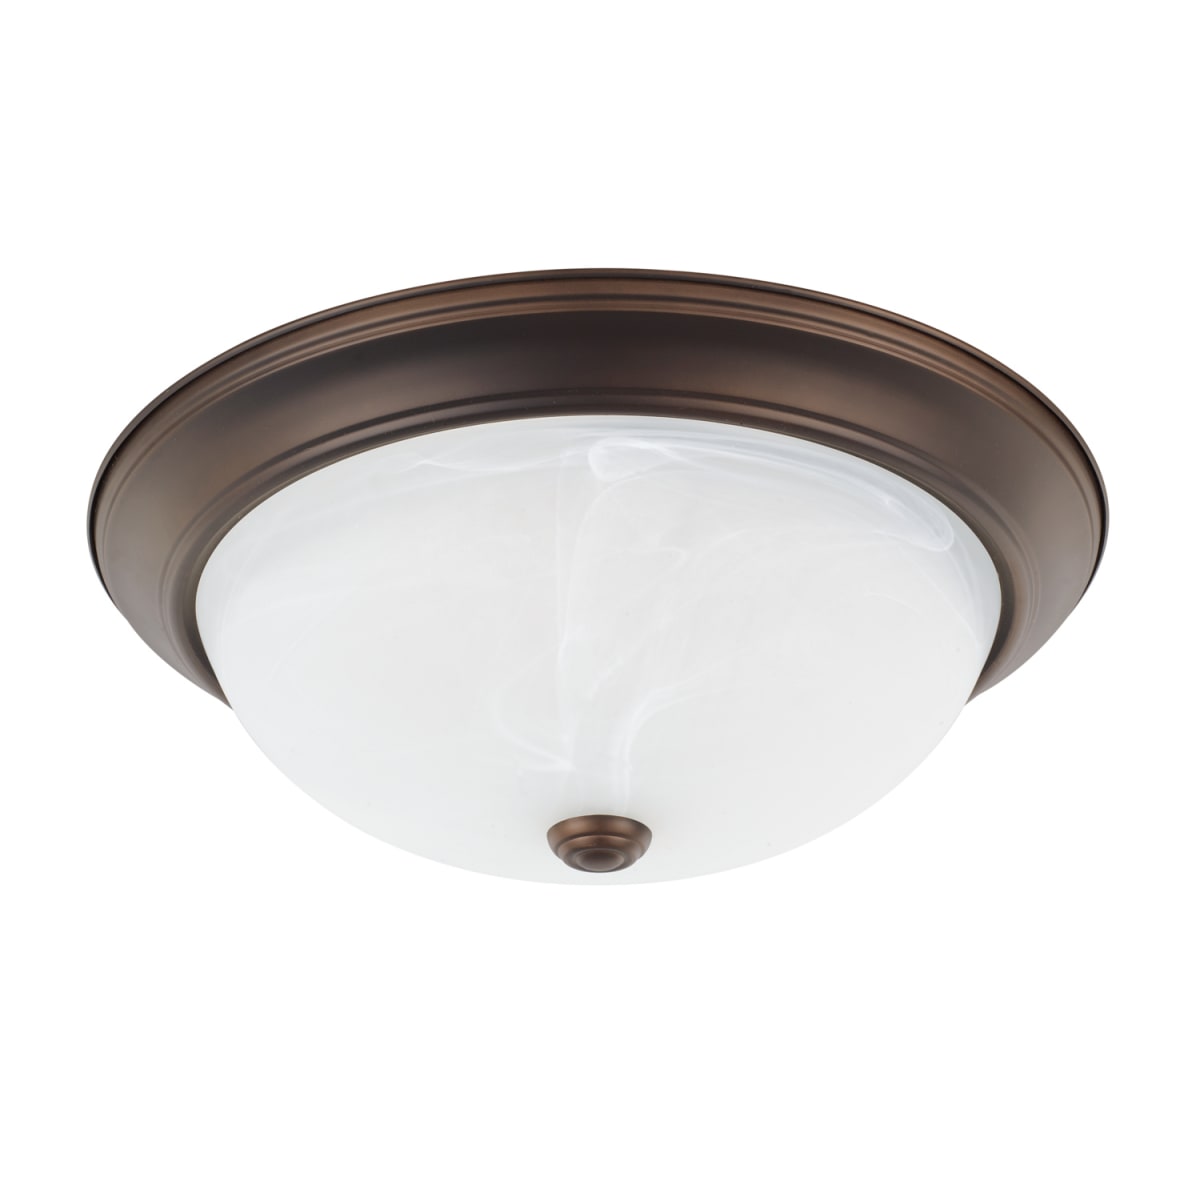 CPTL 219031MN 15" ROUND CEILING MOUNT3-60W BLUBS